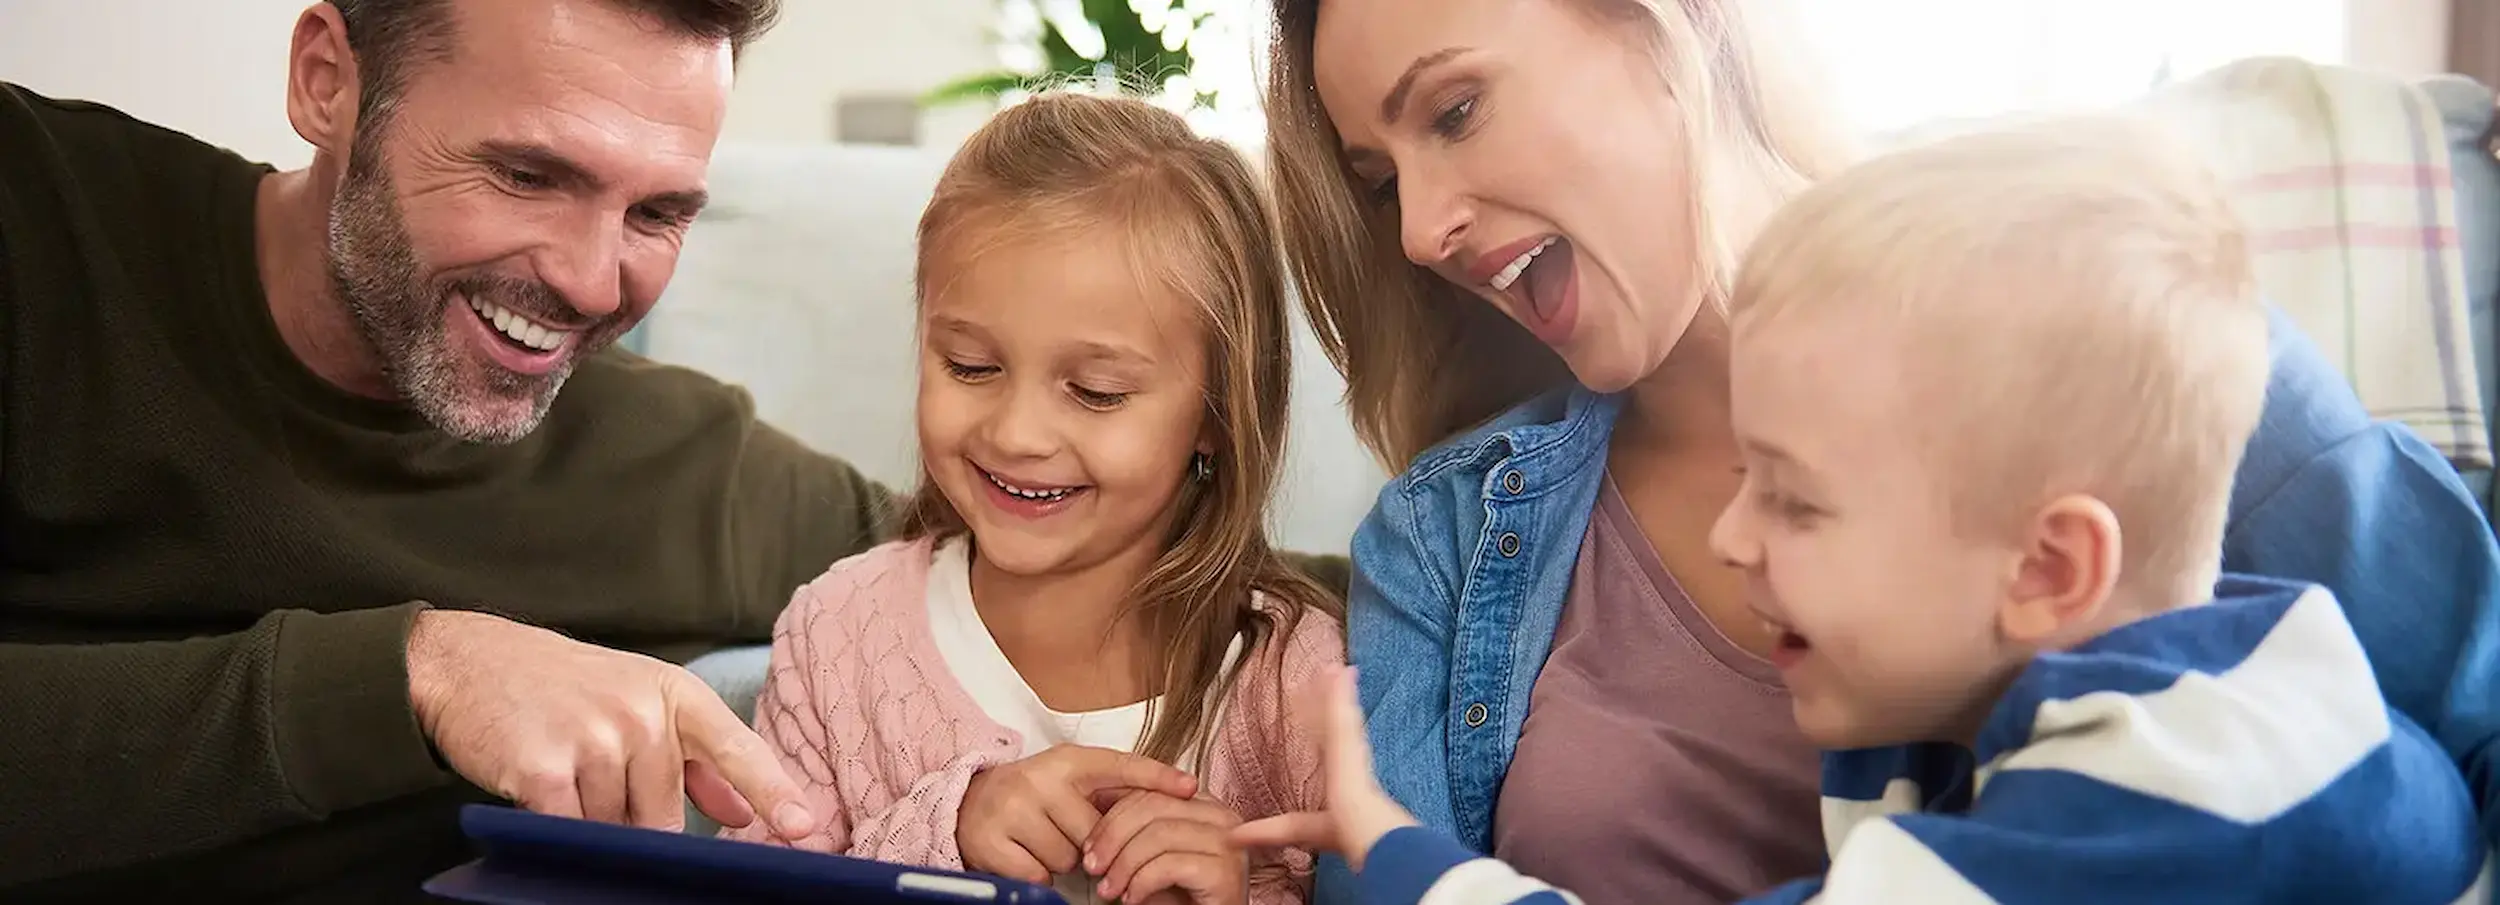 Smiling couple with son and daughter pointing at tablet device in brightly lit interior.